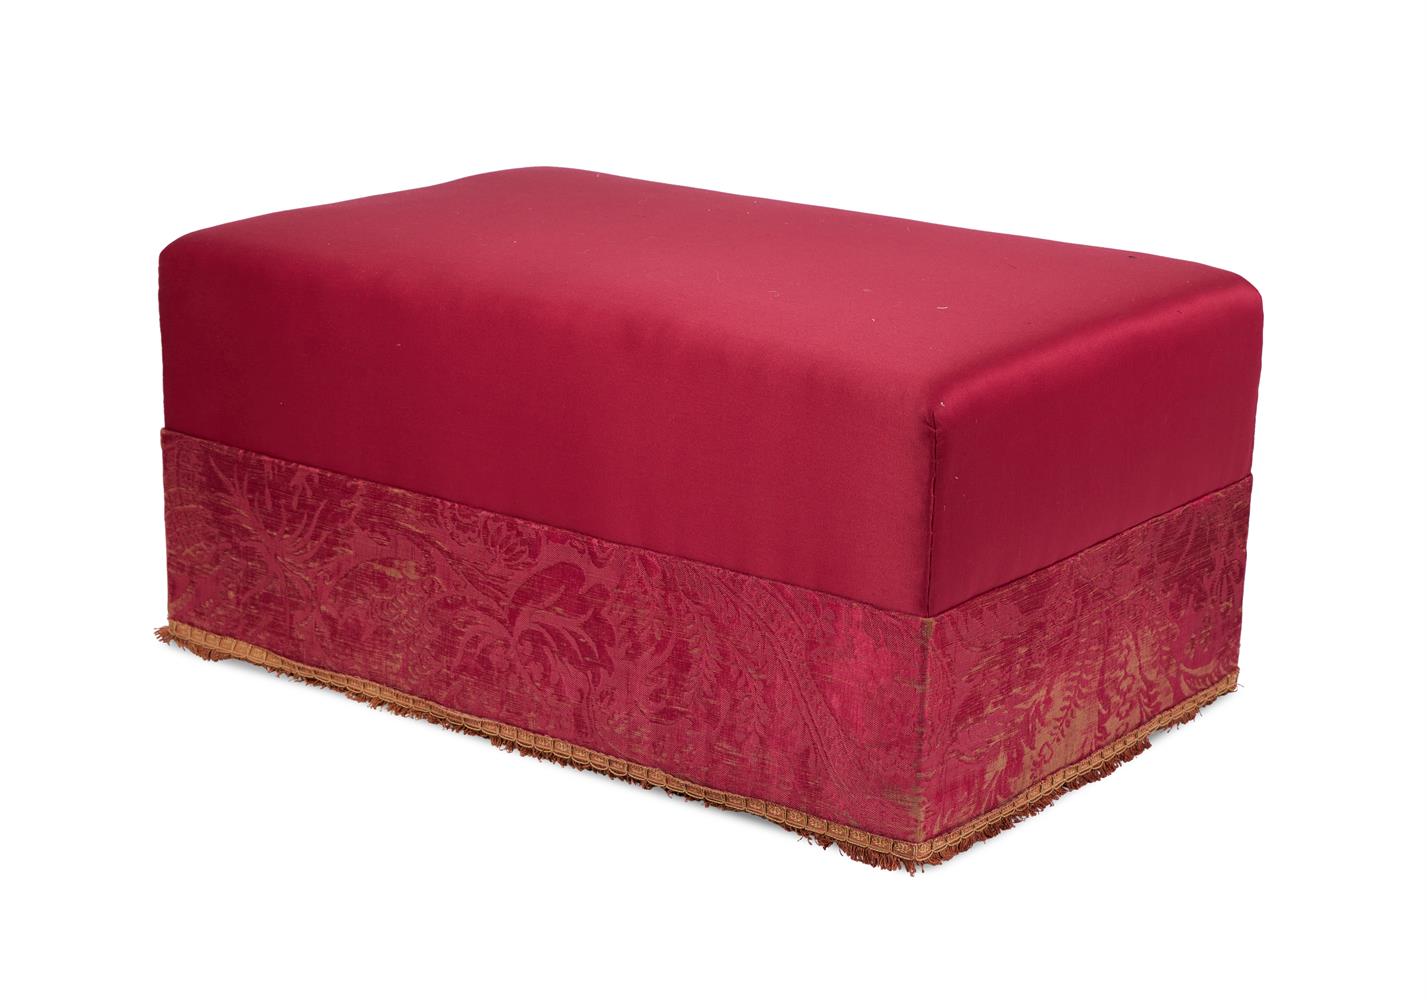 A TEXTILE COVERED OTTOMAN BY ROBERT KIME - Image 3 of 3